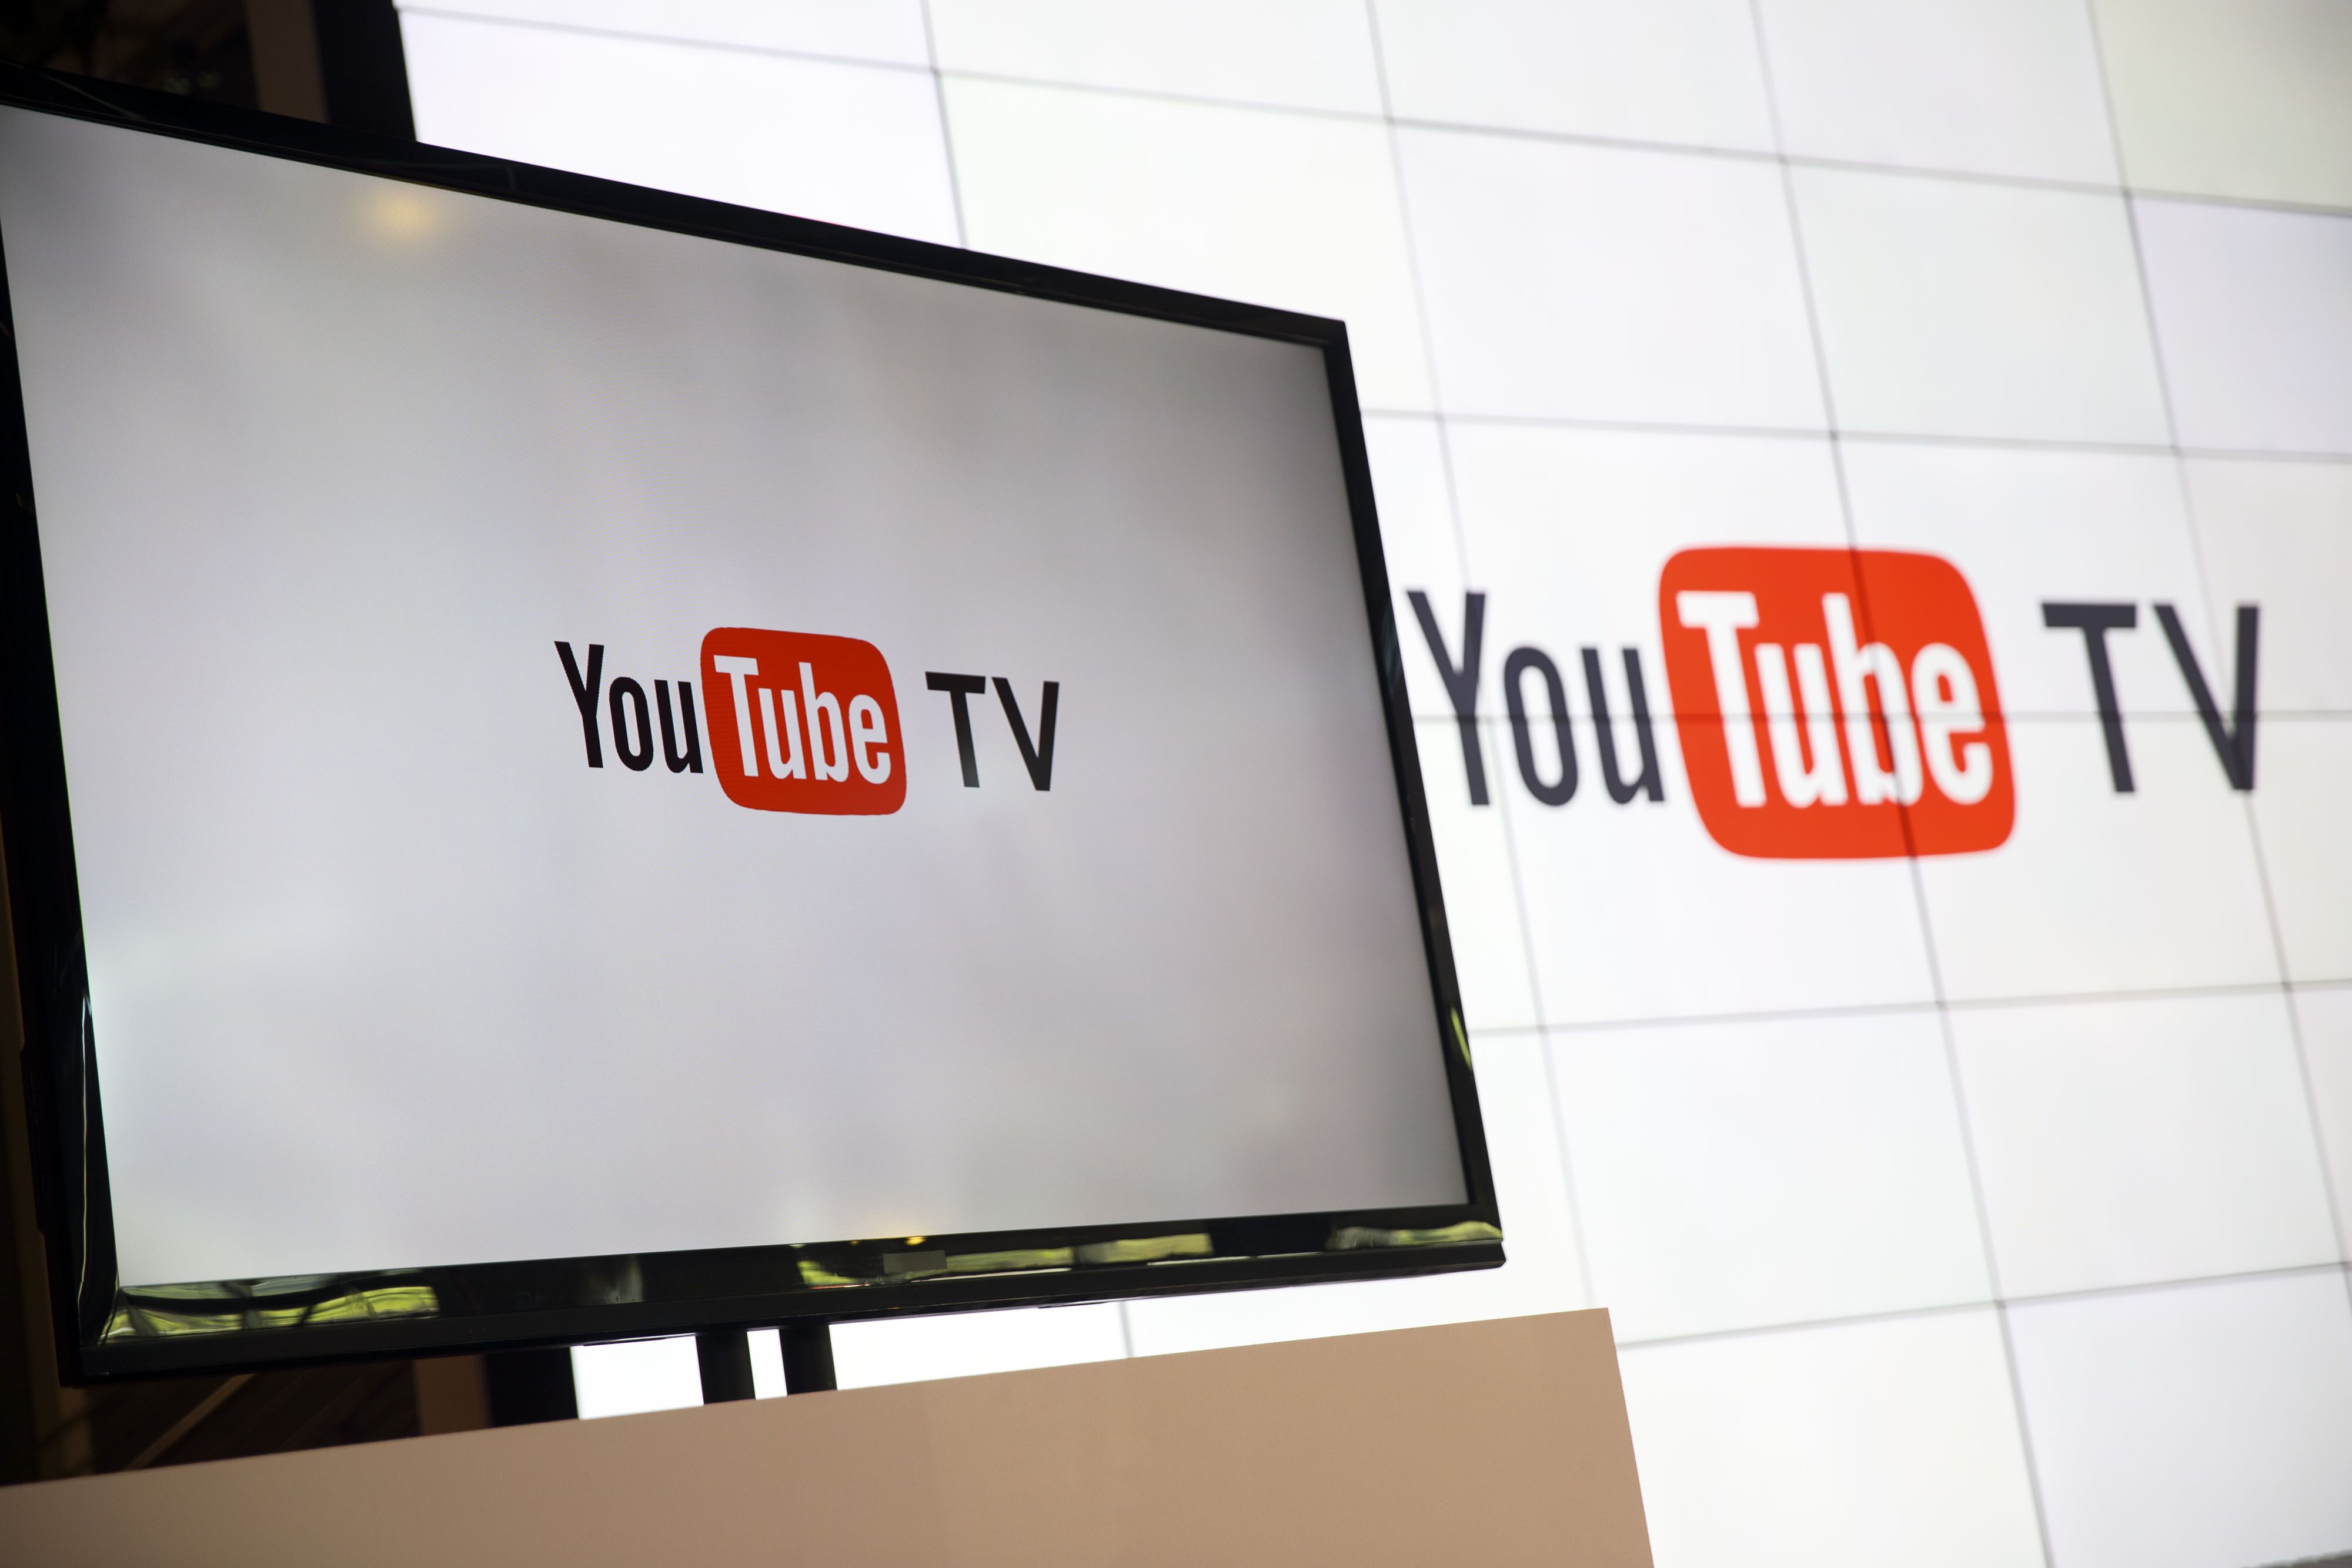 YouTube TV reaches agreement with Disney to return ESPN, ABC, others to streaming service